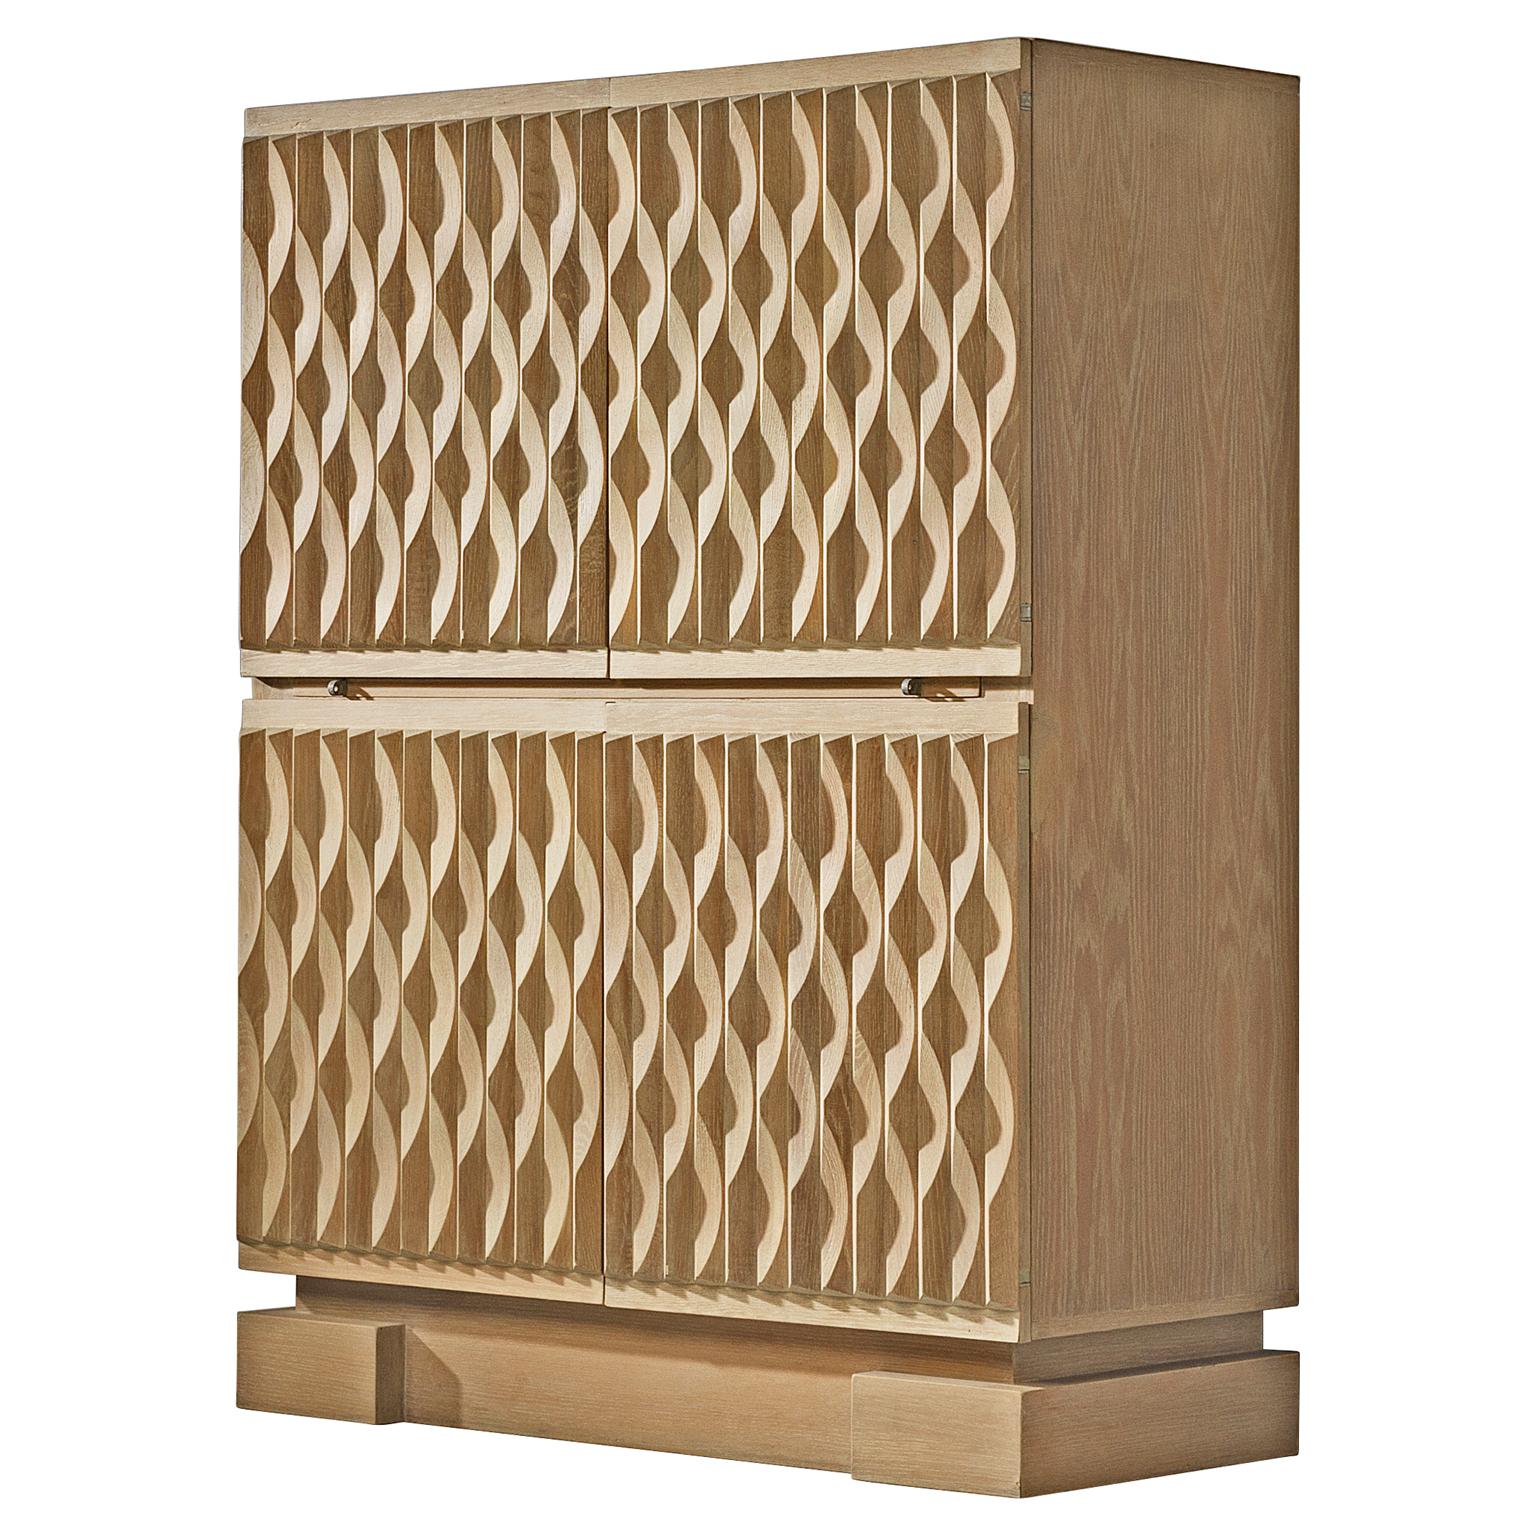 Illuminated Brutalist High Cabinet with Structured Oak Doors